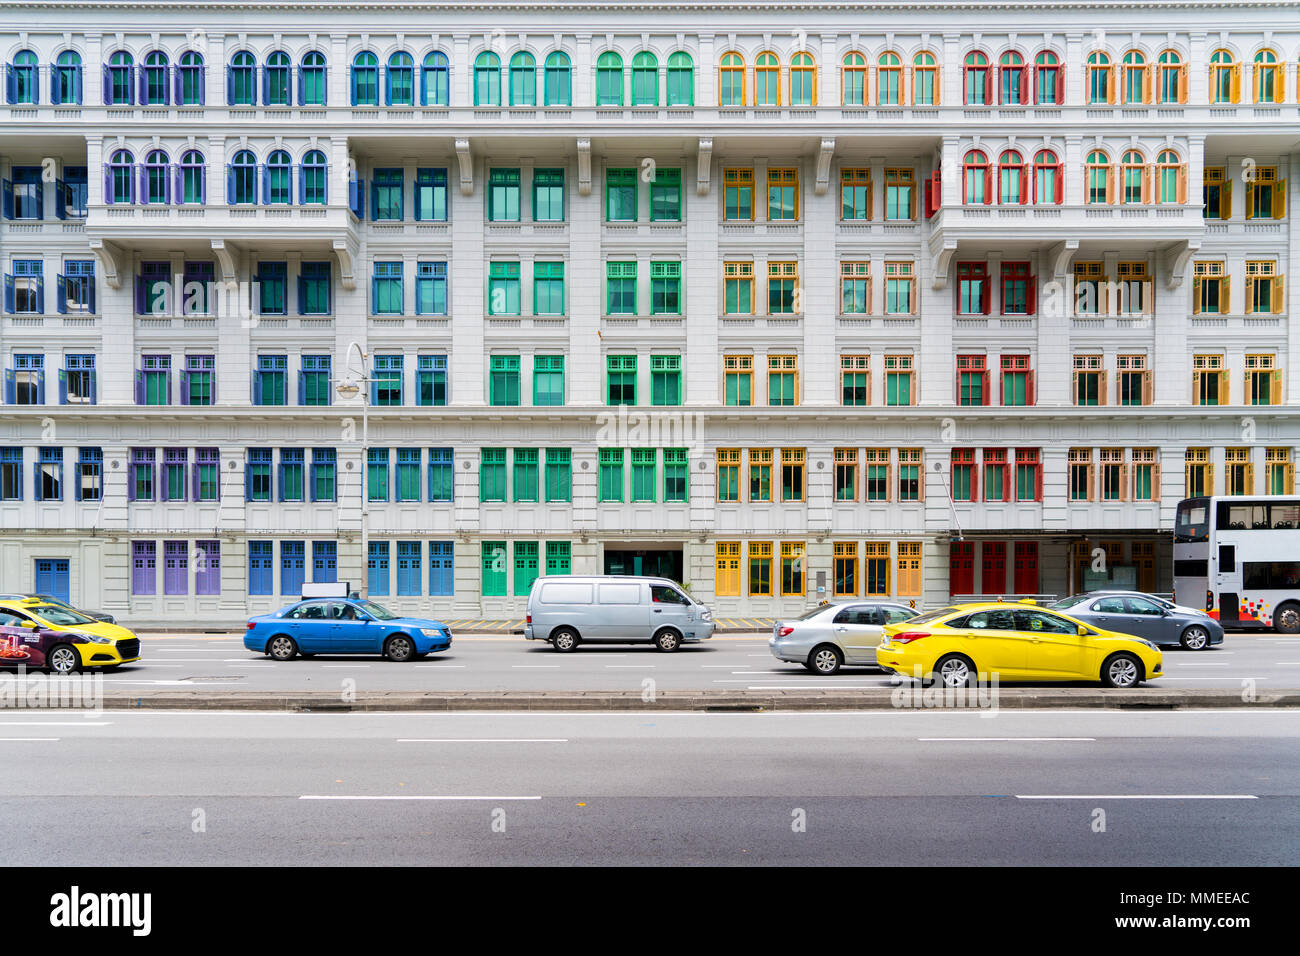 Colorful heritage building windows in Singapore. Neoclassical style building with colorful windows in Singapore. Stock Photo